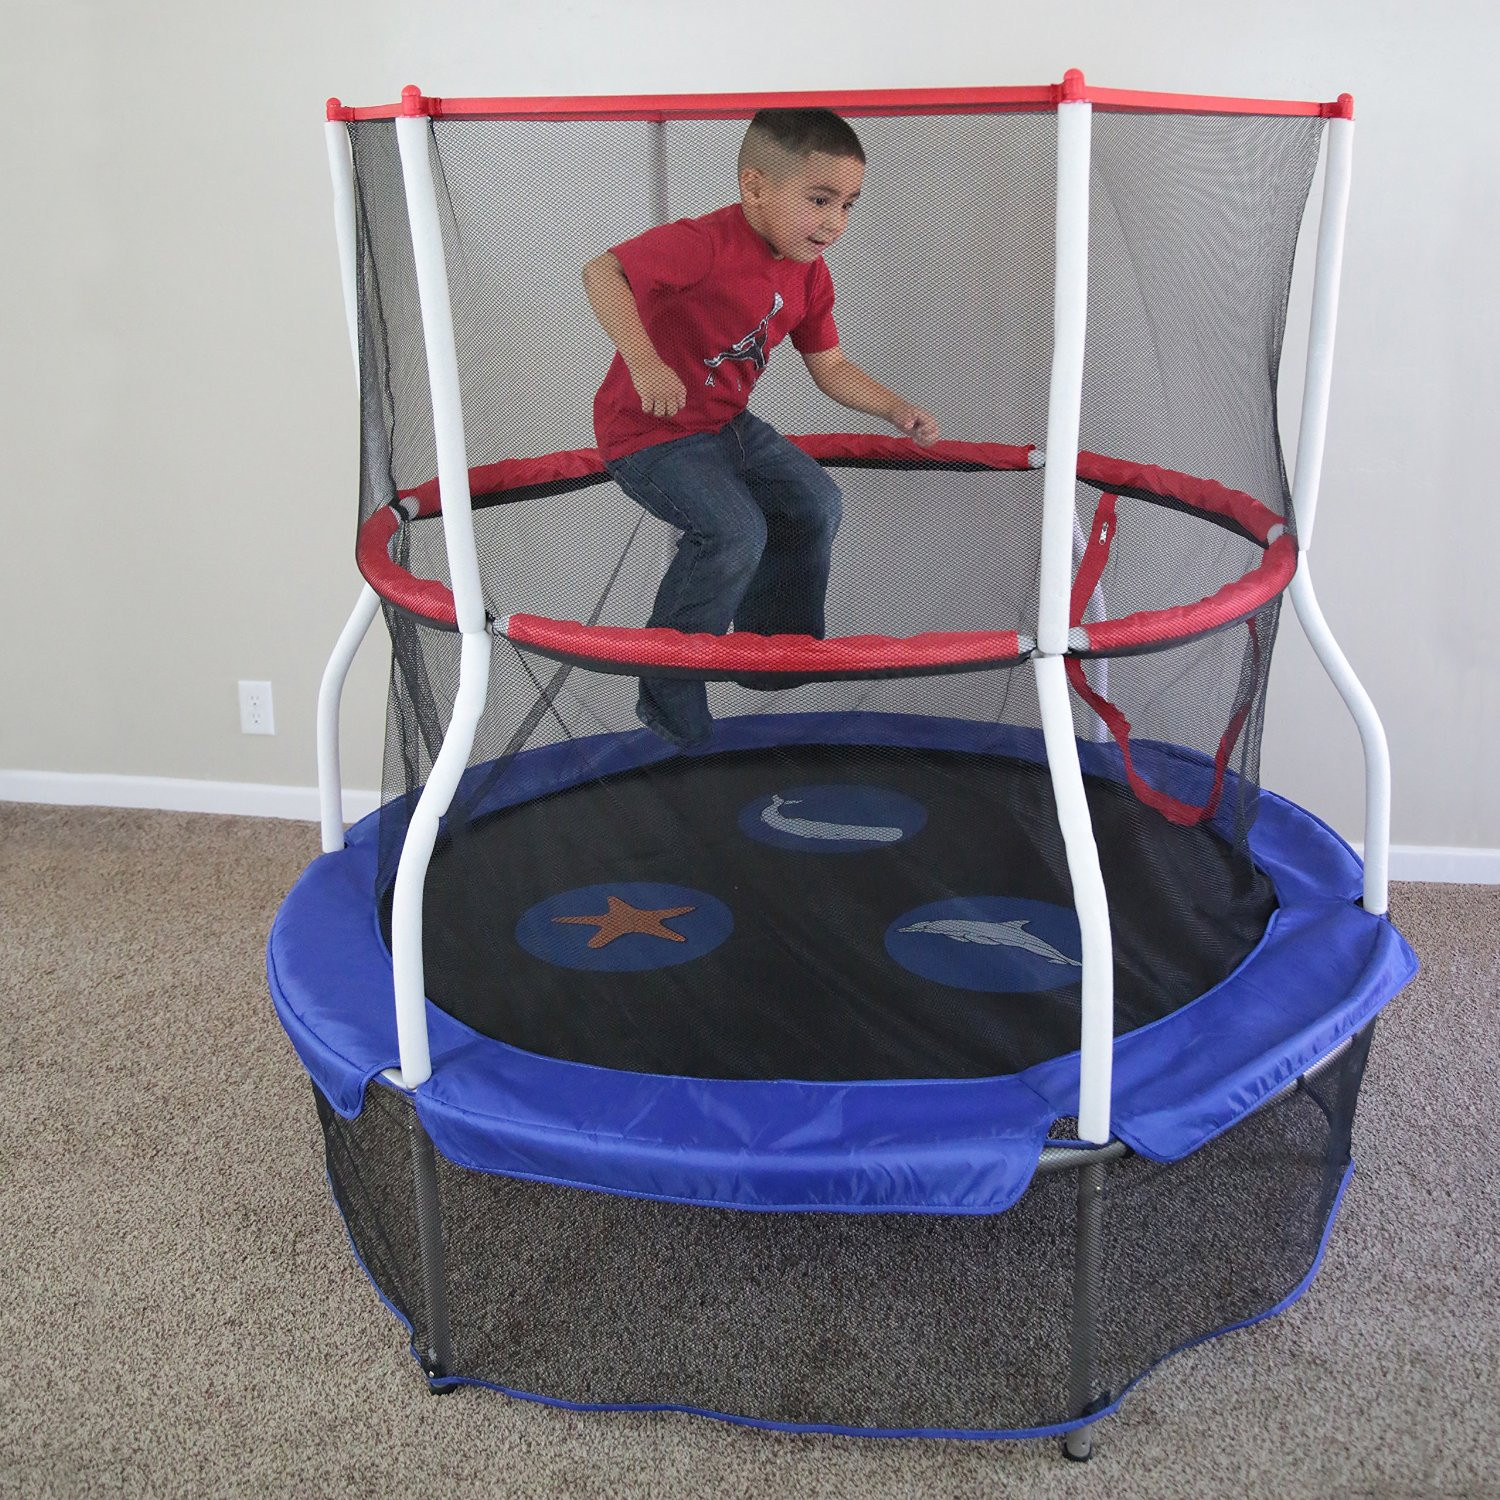 Outdoor Trampoline For Kids
 Best Trampoline for Kids Our Top 3 Picks and Reviews